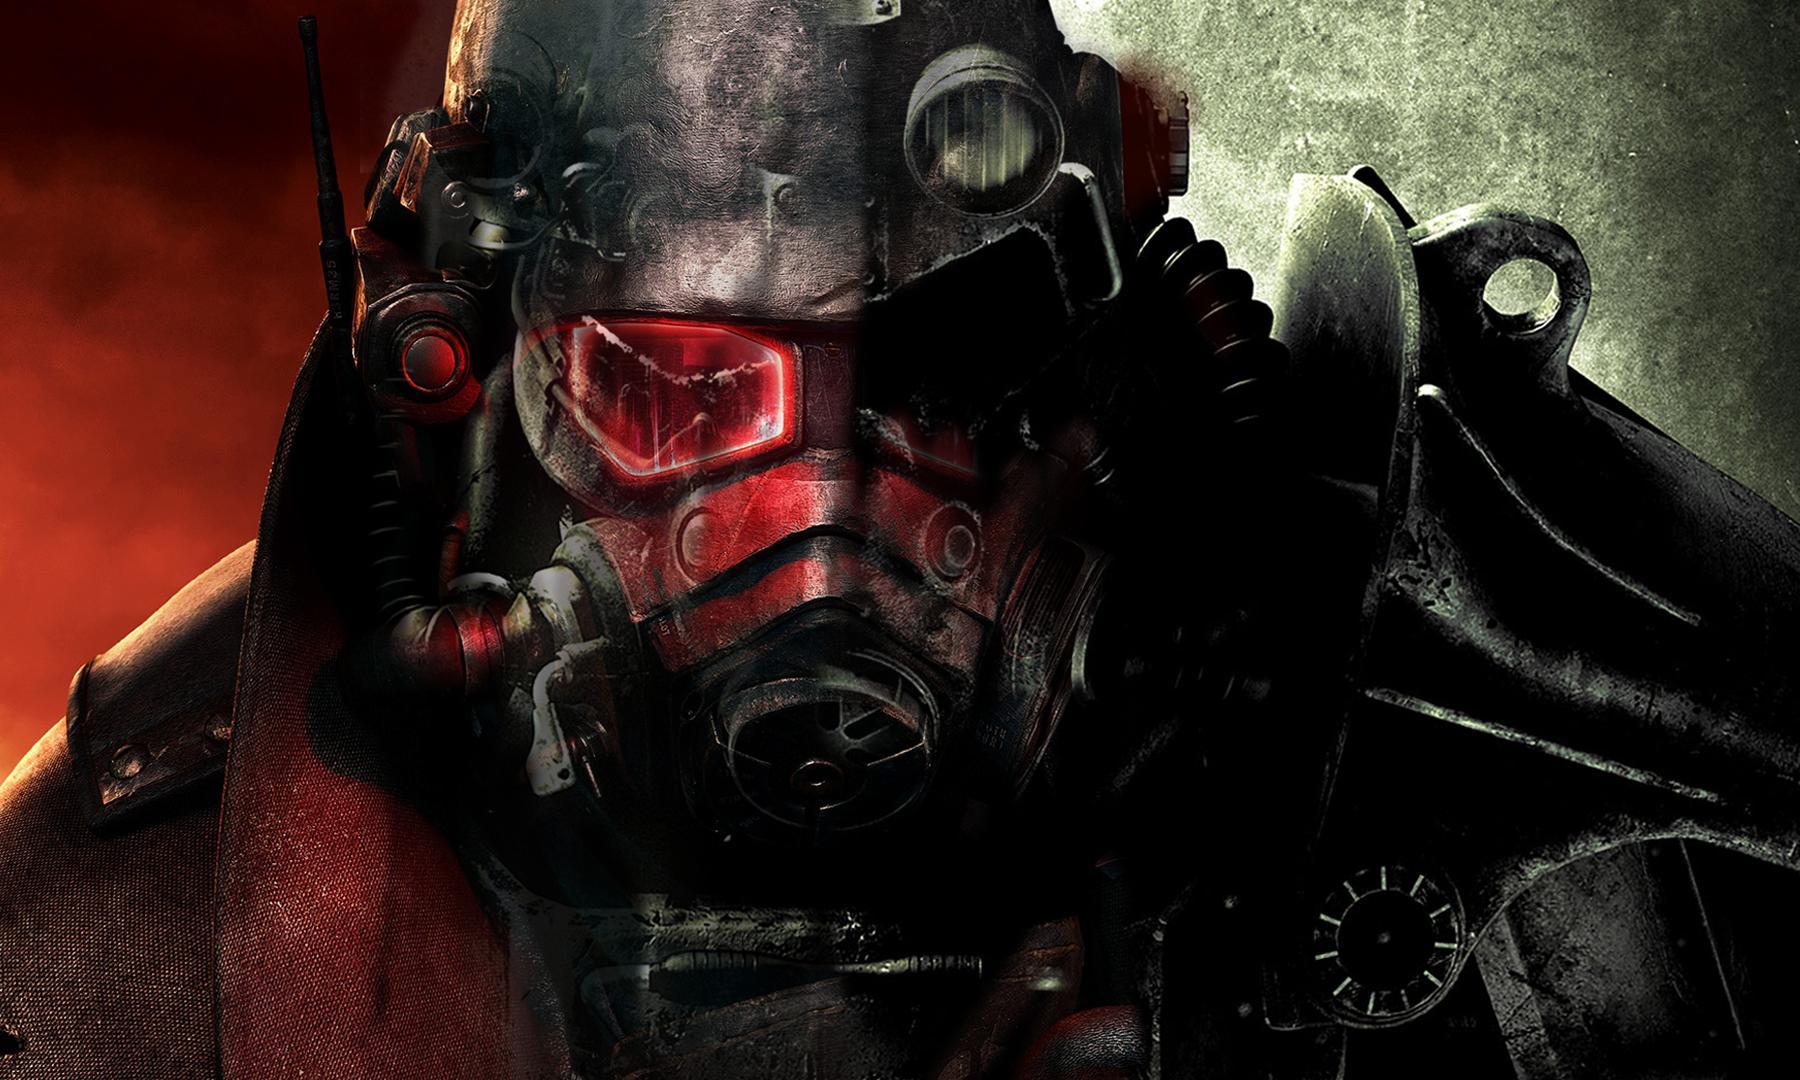 We All Role Play image Fallout HD wallpaper and background photo